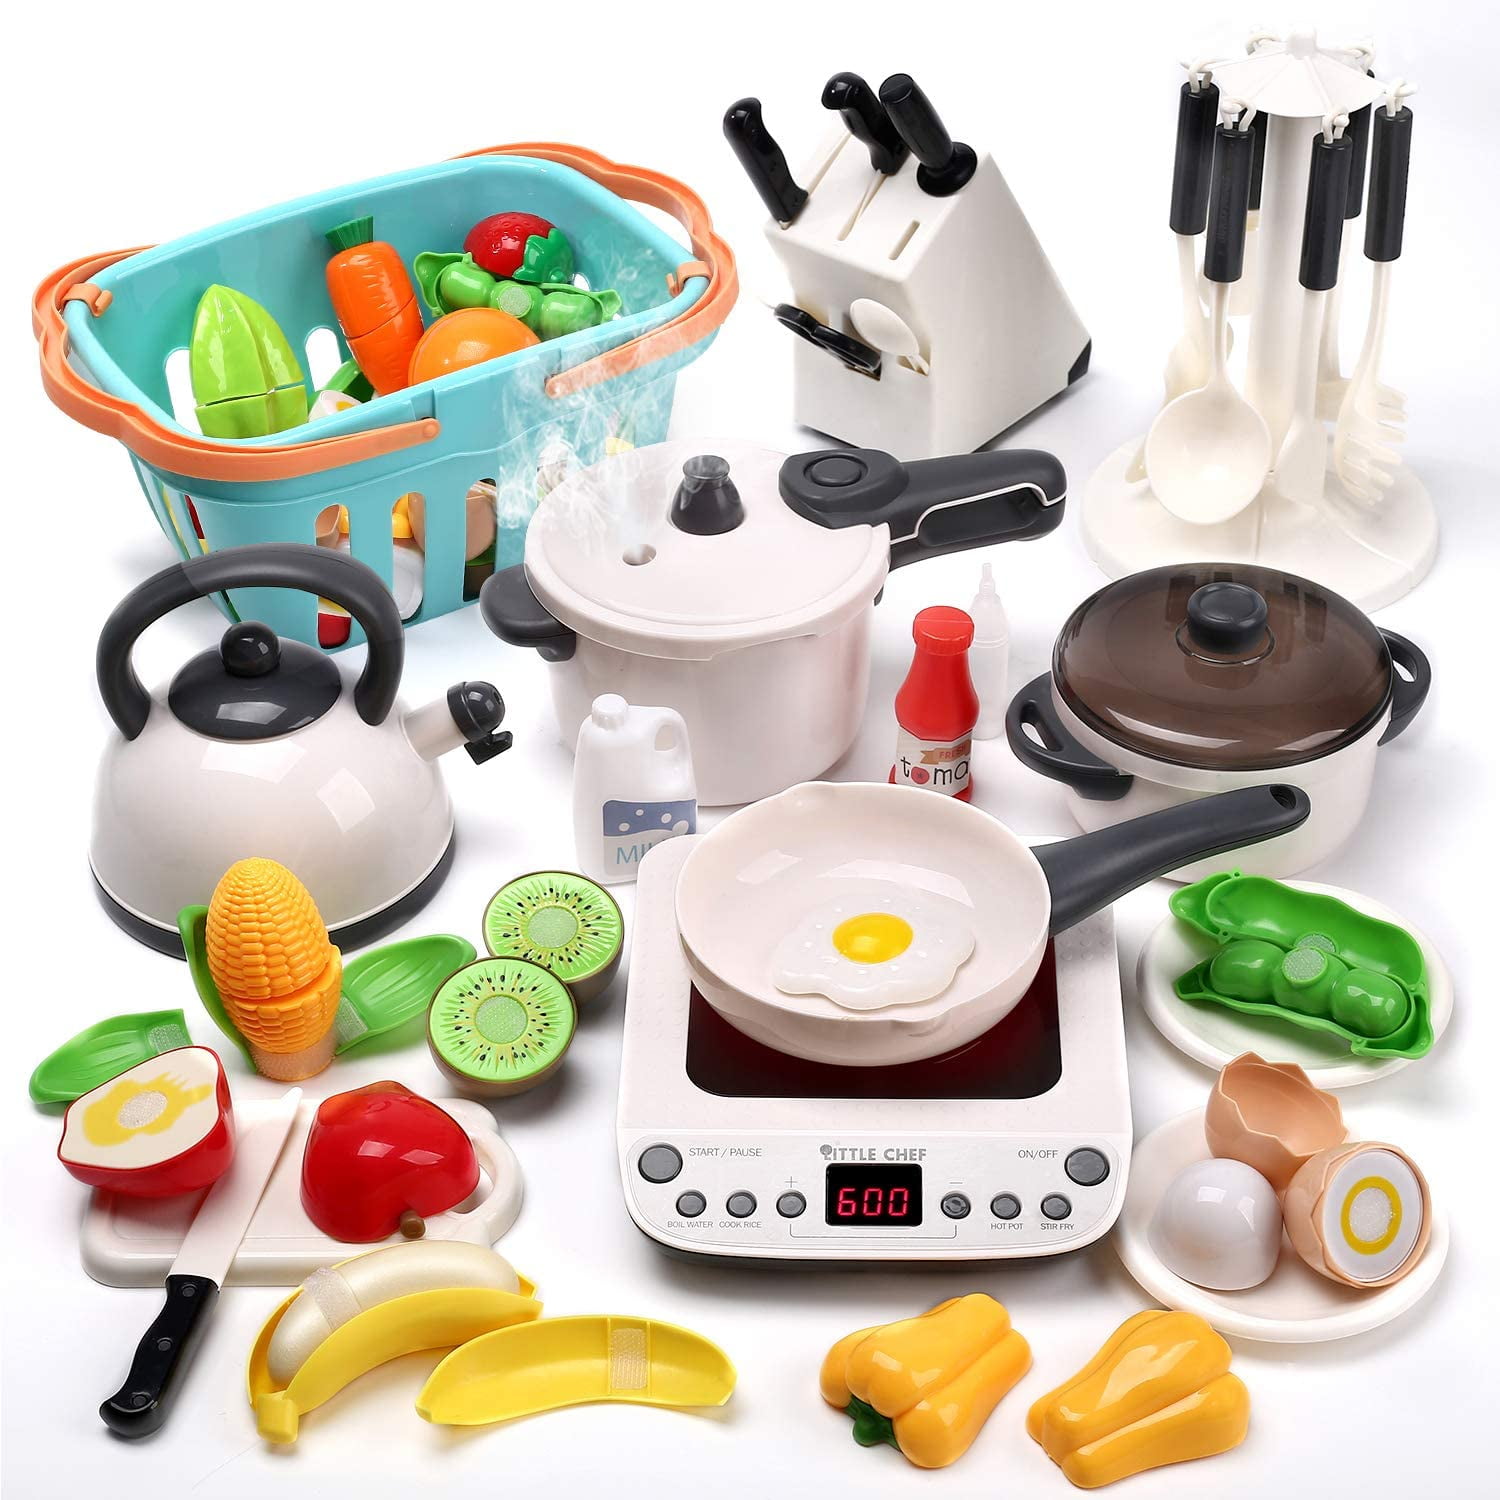 BeebeeRun Pretend Play Kitchen Toys,Kids Kitchen PlaySet with Electronic Induction Cooktop Steam Pressure Pot,Cookware,Kitchen Accessories,Cut Play Food,Shopping Basket,Learning Gifts for Girls Boys 